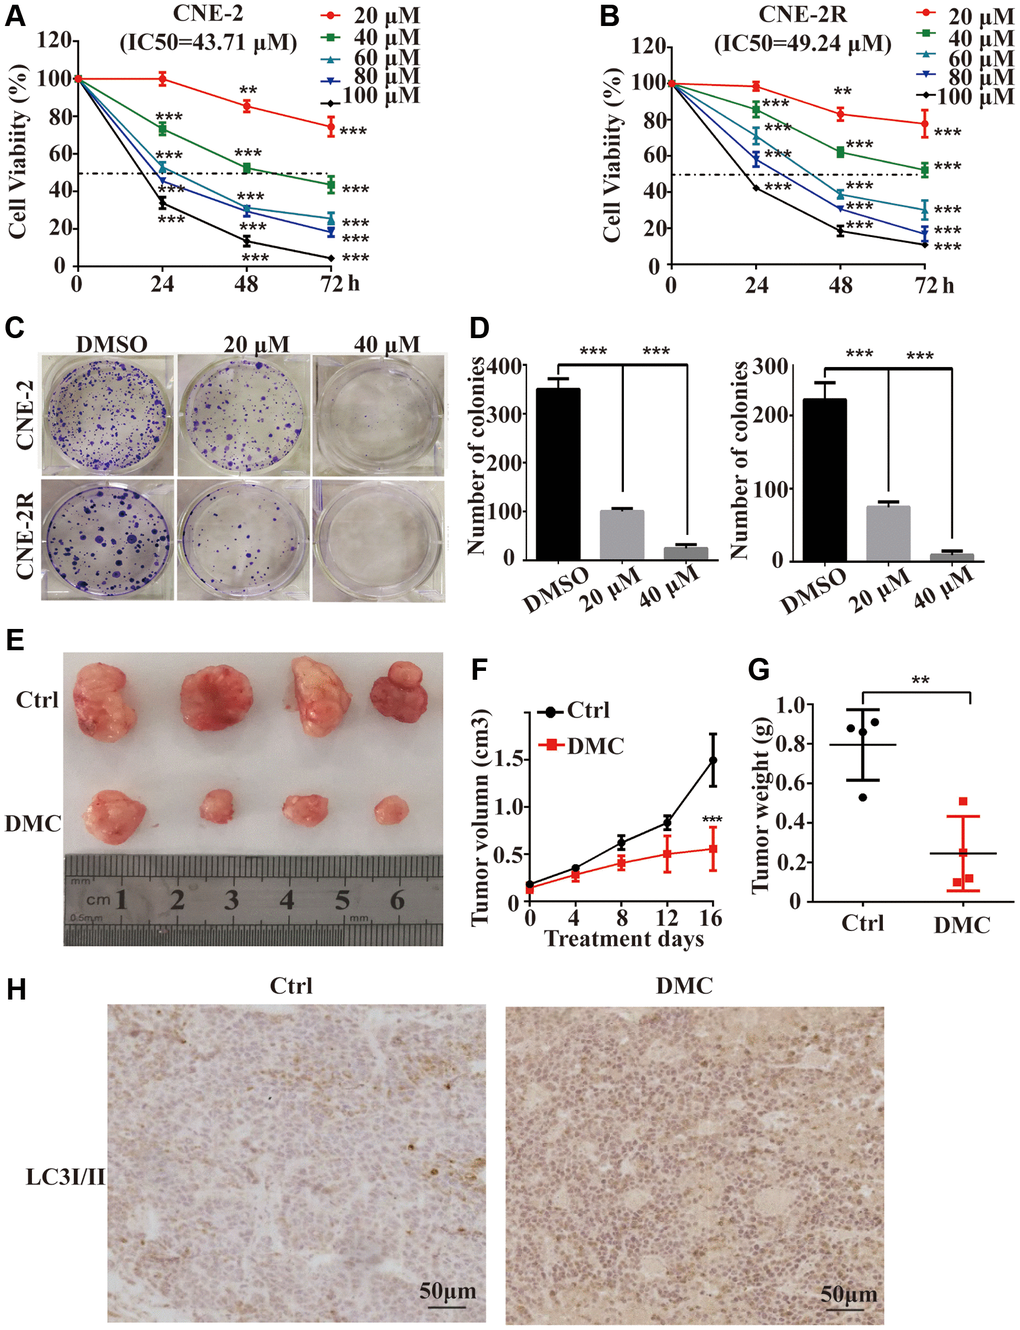 DMC inhibited the proliferation of NPC both in vitro and in vivo. (A, B) CNE-2 and CNE-2R cells were incubated with 0-100 μM of DMC or 0.1% DMSO for 24 h -72 h, and cells viability was then quantified by the MTT assay. (C, D) The ability of single CNE-2 and CNE-2R cell to form clones after treating with 0.1% DMSO, 20 μM, or 40 μM DMC assessed by colony formation assay. (E) Representative images of BALB/c-nude xenografts from nude mice following the injections of CNE-2 cells in control or DMC group. (F) Tumor volumes of xenografts in nude mice for each group was recorded every 4 days after DMC treatment. (G) The tumors were removed and the tumor weight for each group was recorded after all mice were killed. (H) Tumor specimens were analyzed by immunohistochemical staining with LC3-II antibodies. **P **P ***P 